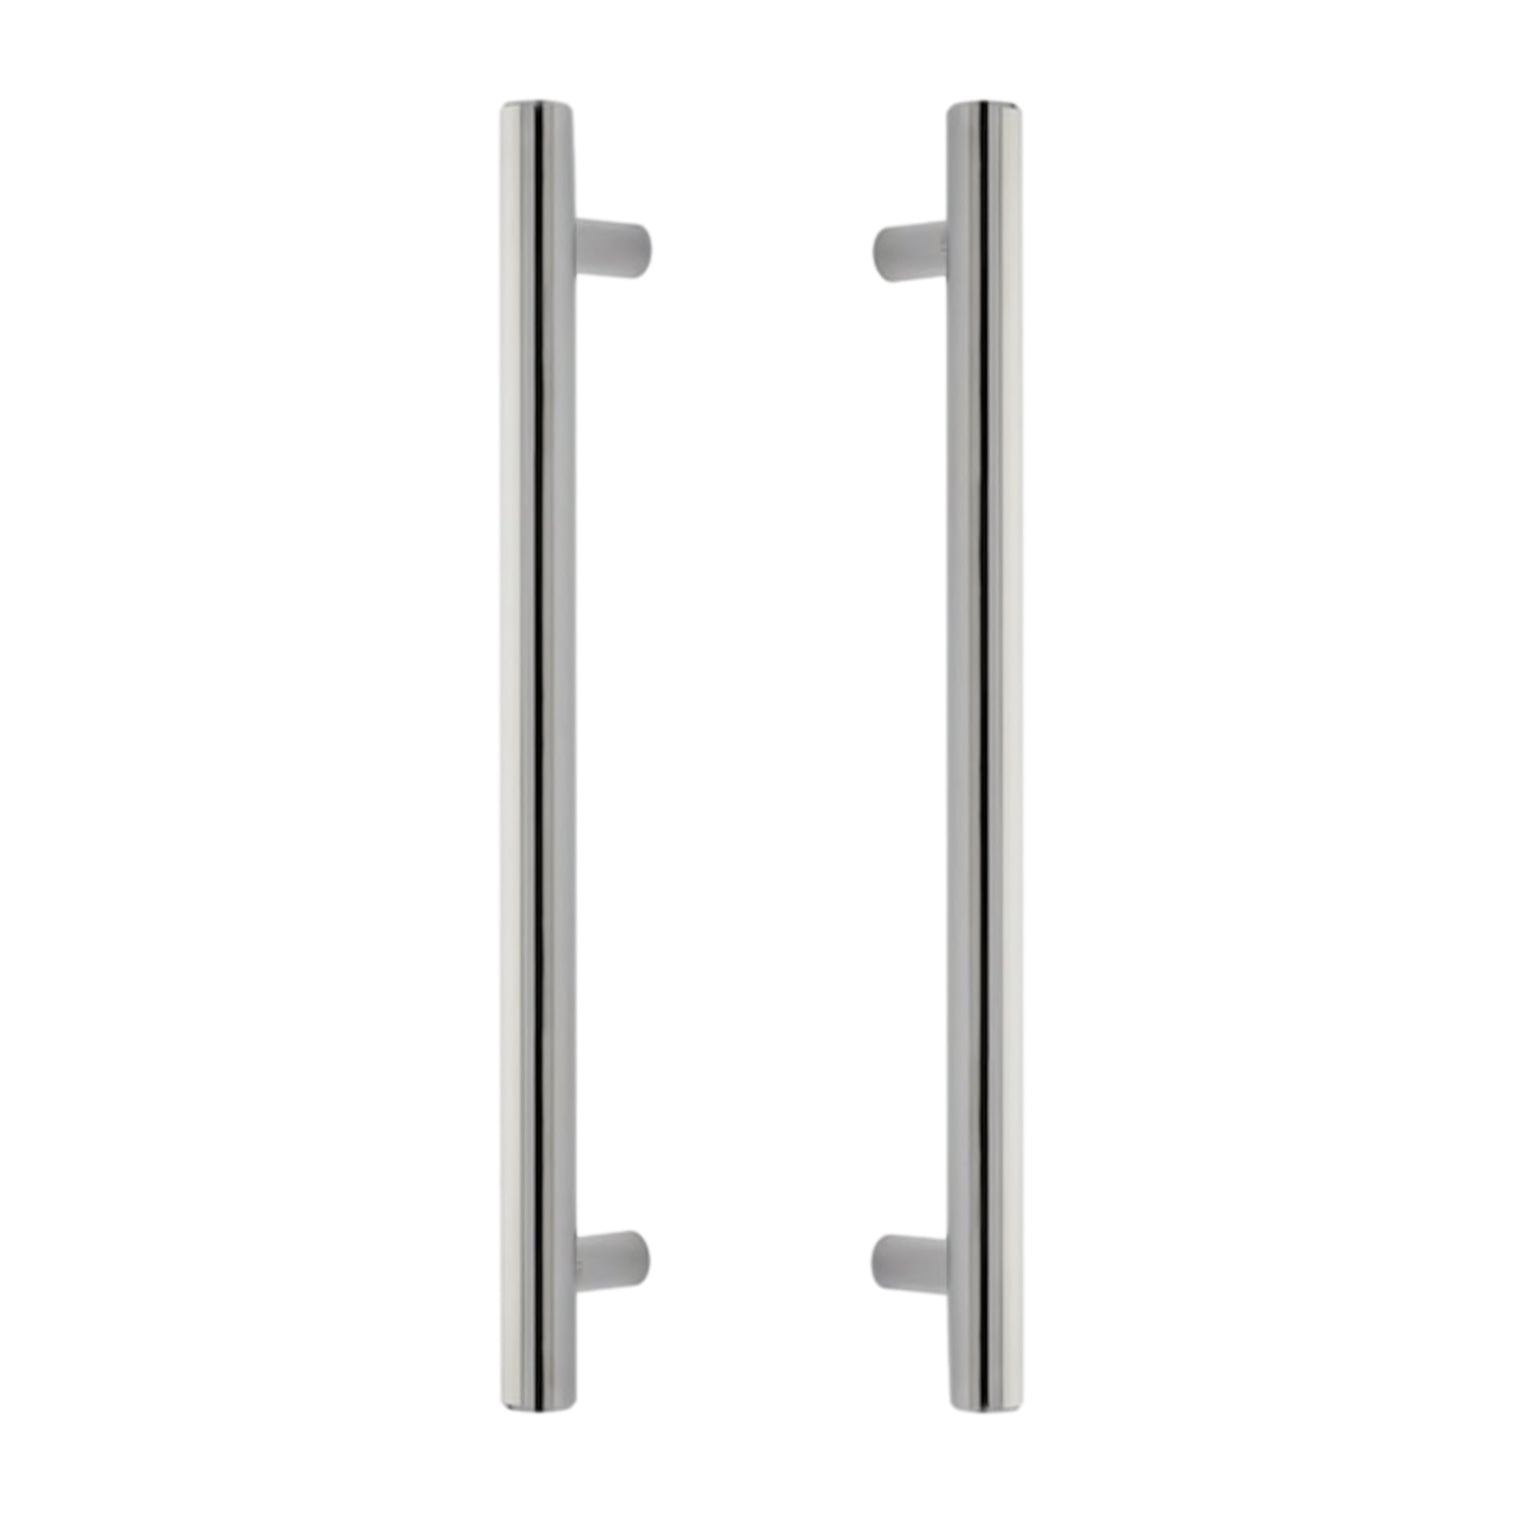 Door Pulls 12" Handle Back to Back Hardware for Interior Sliding and Barn Doors - Industry Hardware